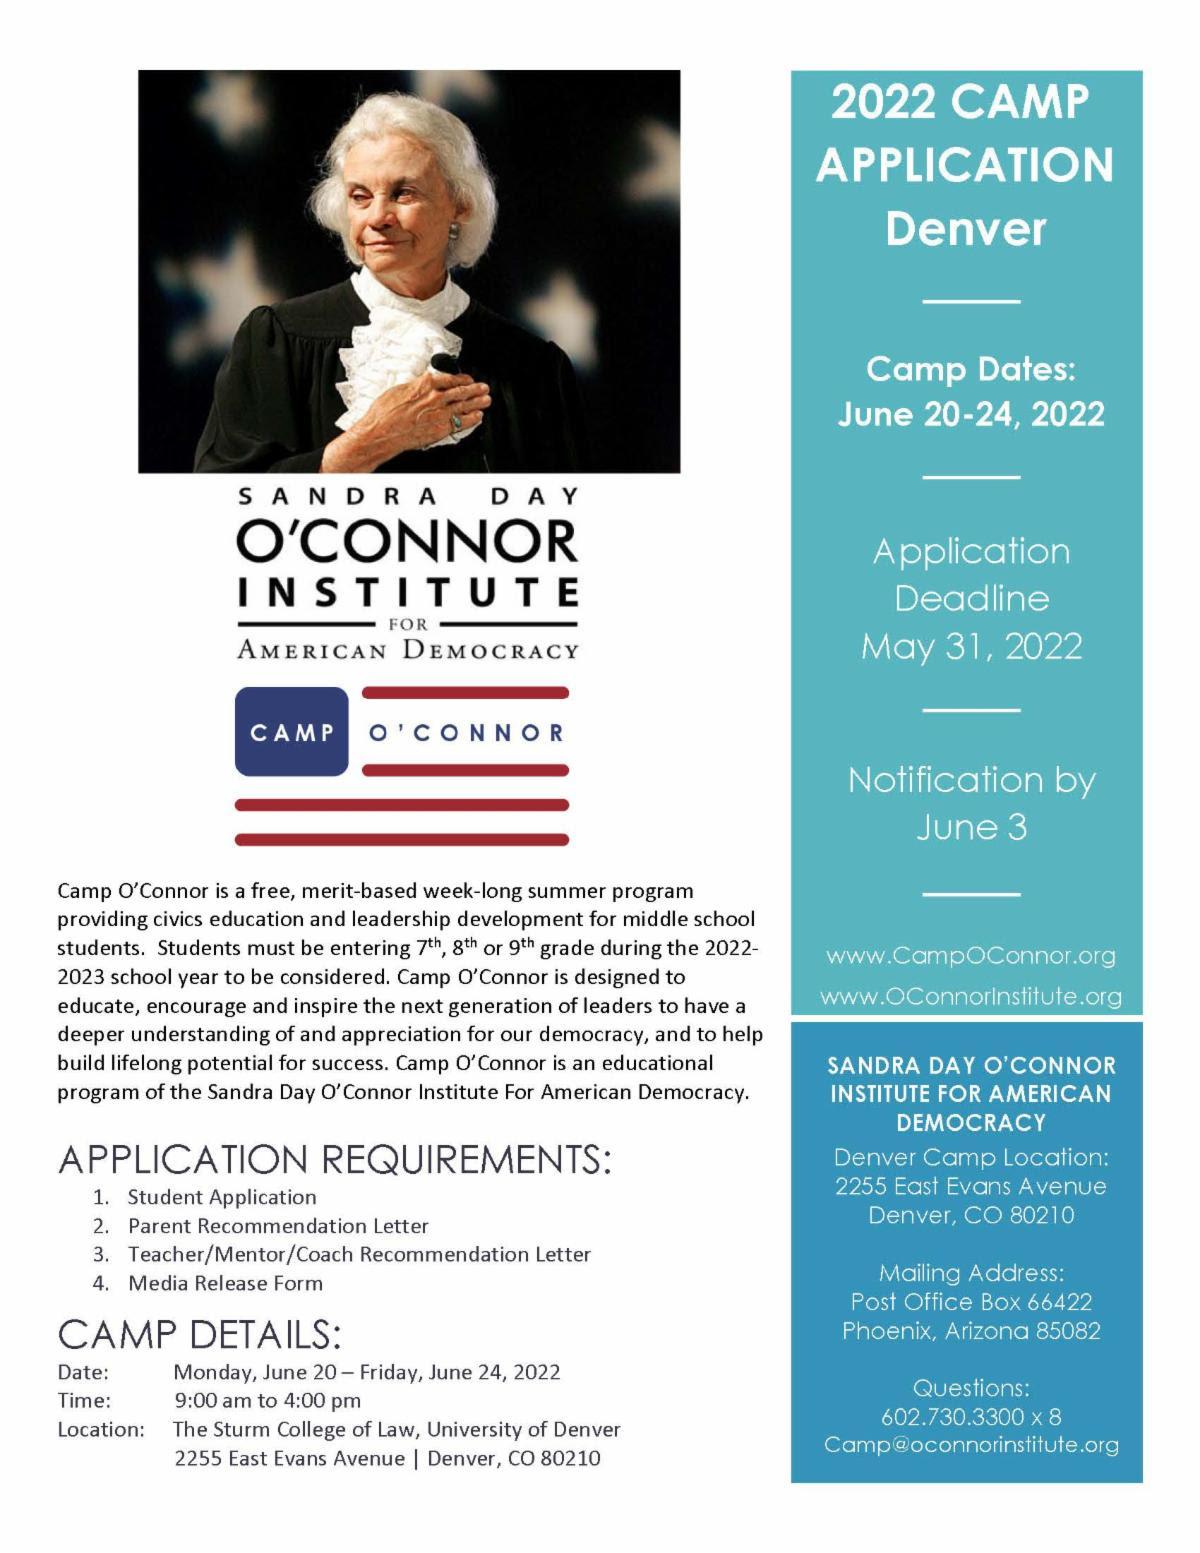 Sandra Day O'Connor Summer Civics Camp for Middle school students